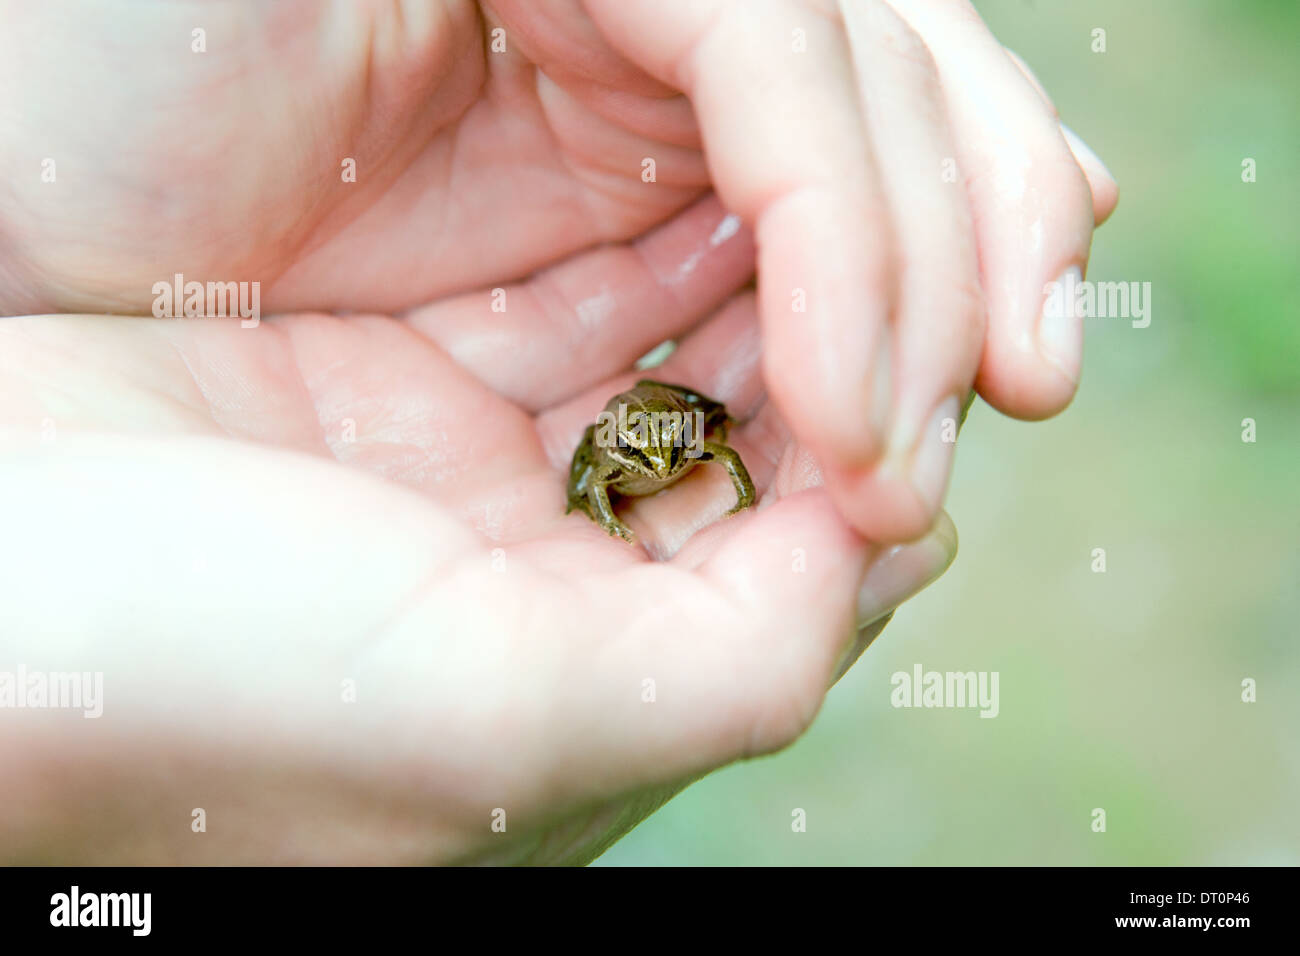 Tiny frog in the palm of a hand Stock Photo